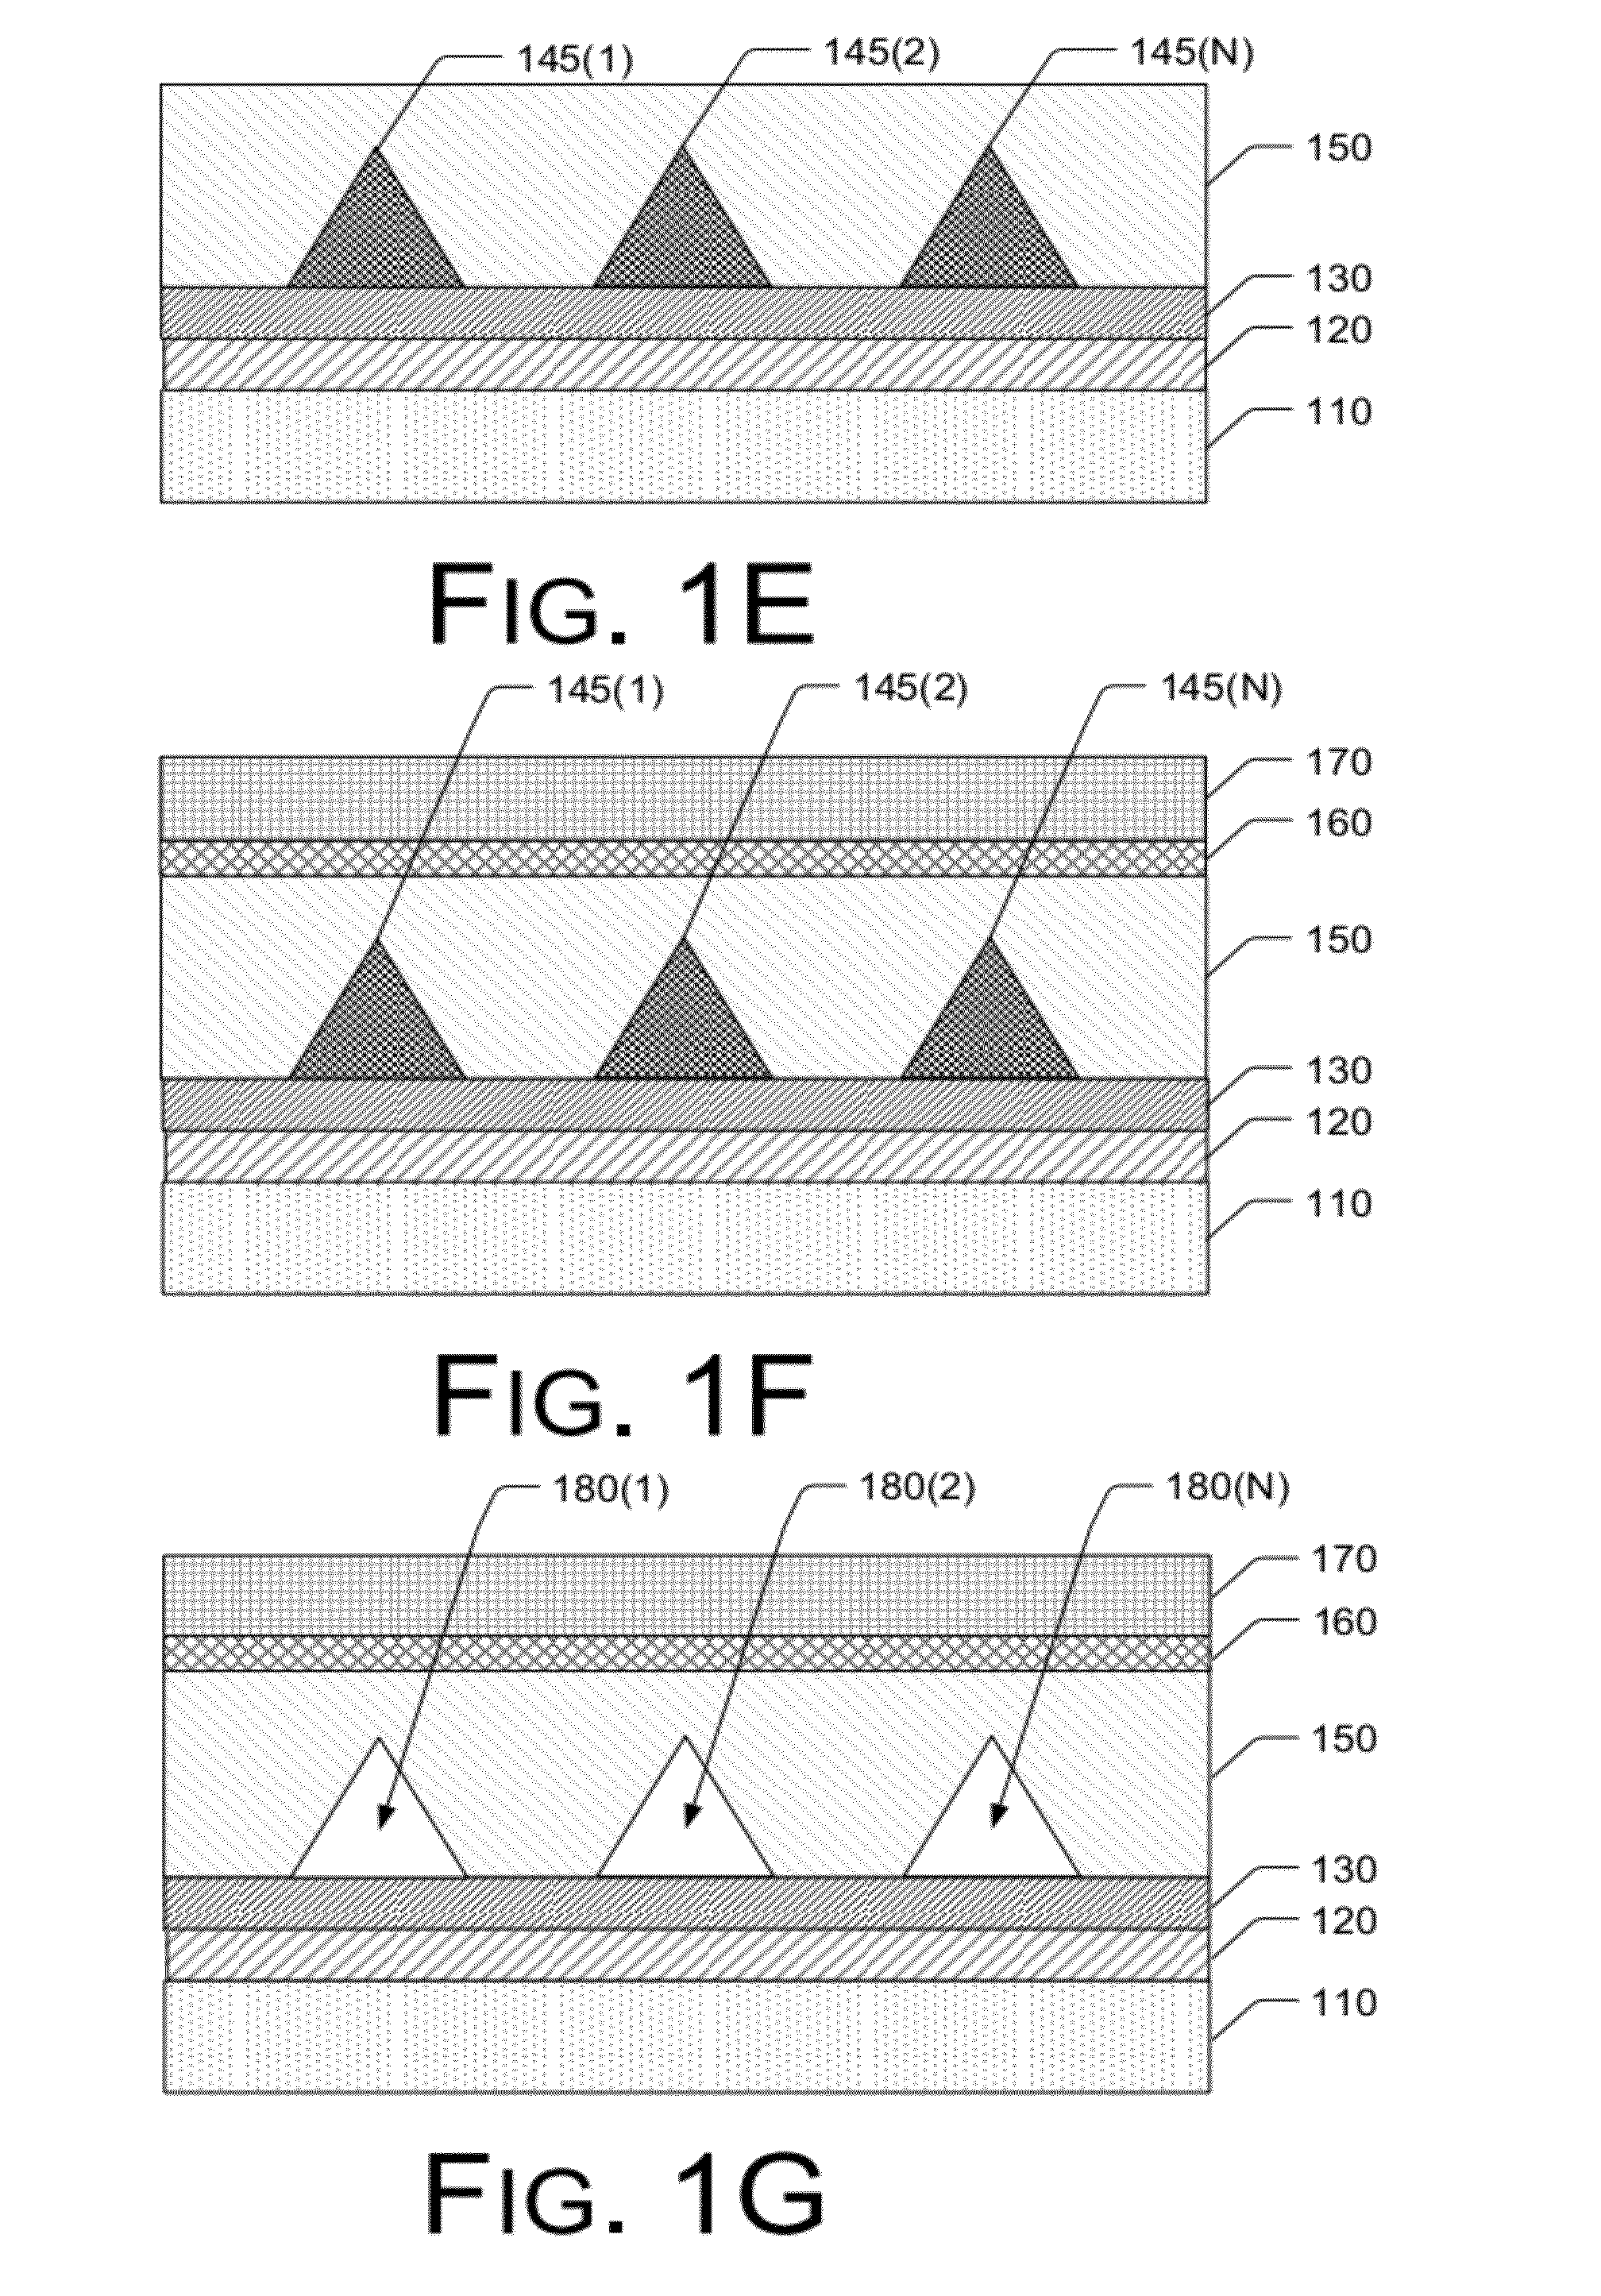 Method of Selective Photo-Enhanced Wet Oxidation for Nitride Layer Regrowth on Substrates